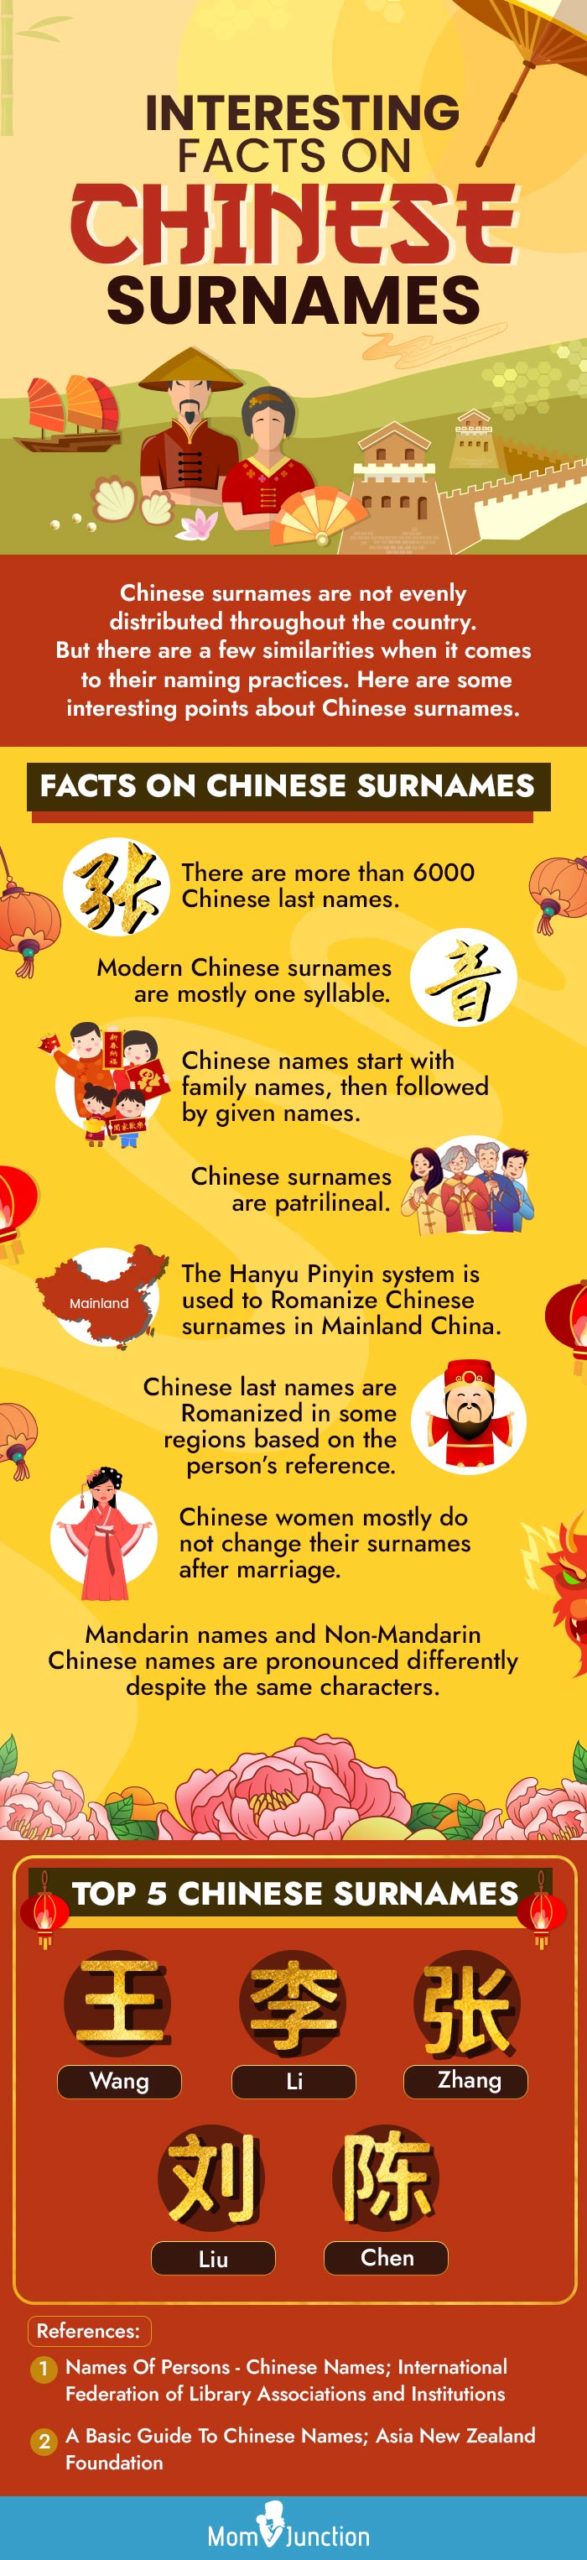 interesting facts on chinese surnames [infographic]